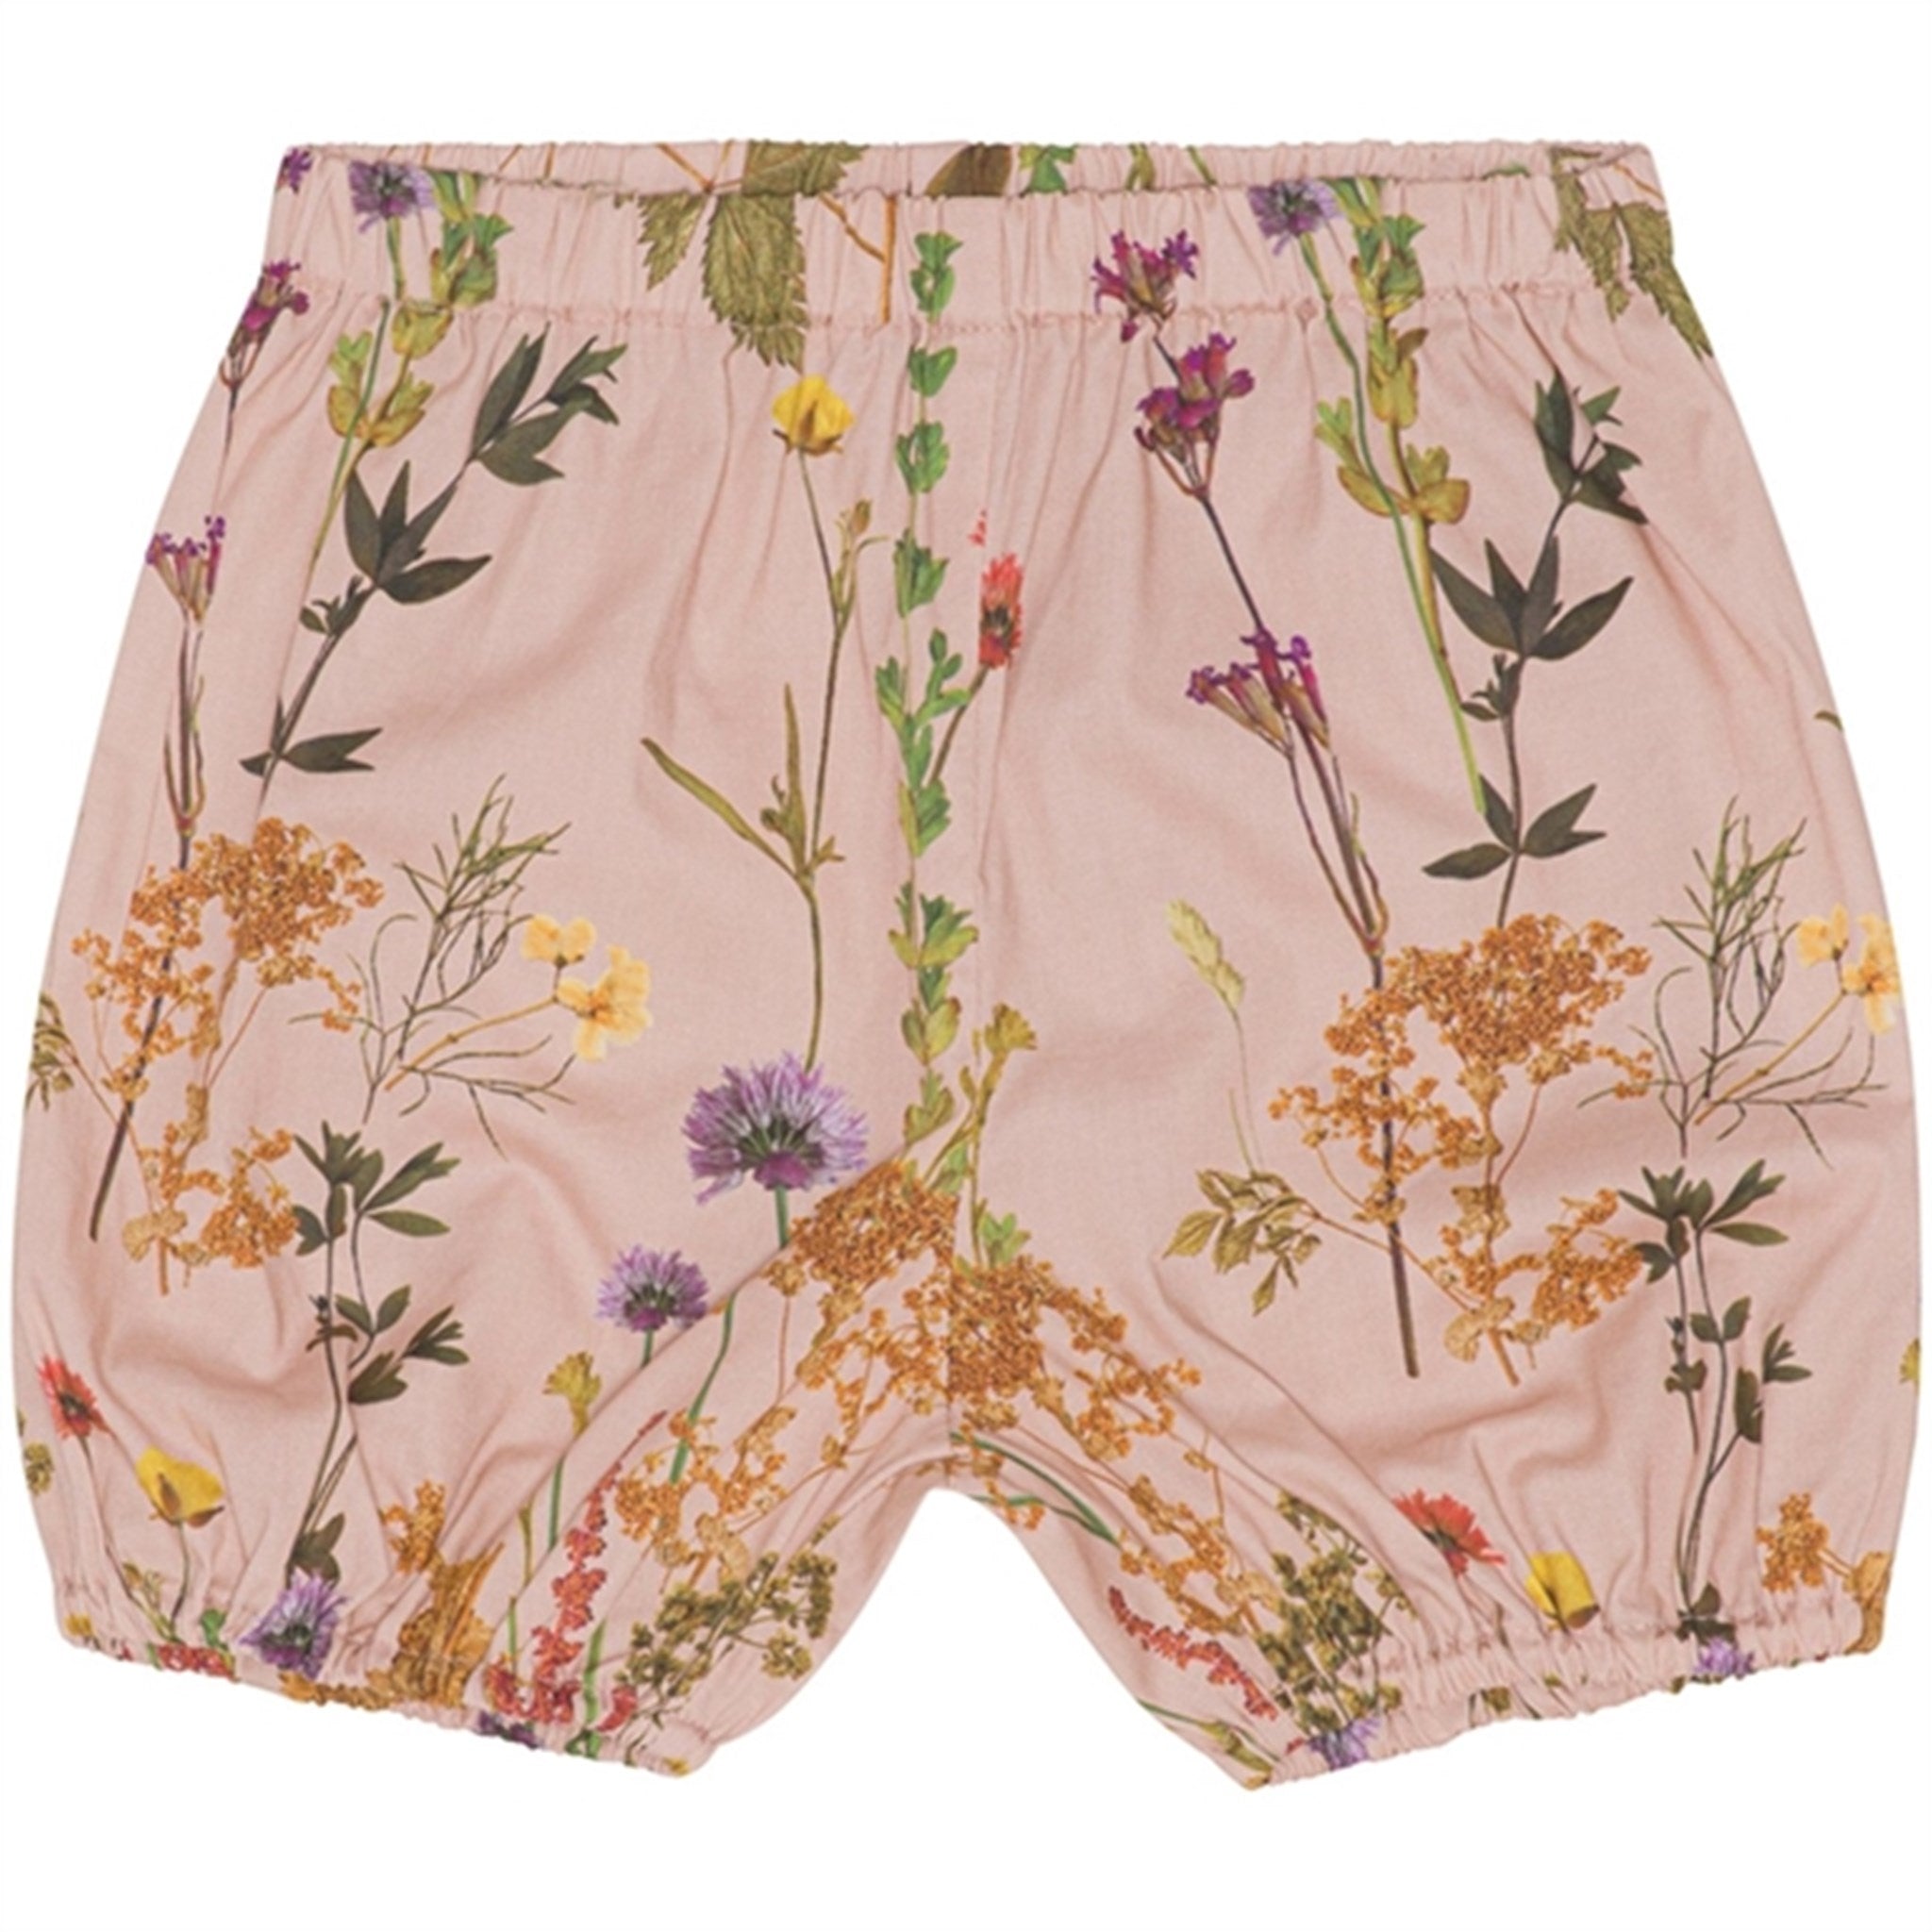 Christina Rohde 819 Shorts Lovely Pale Rose Floral